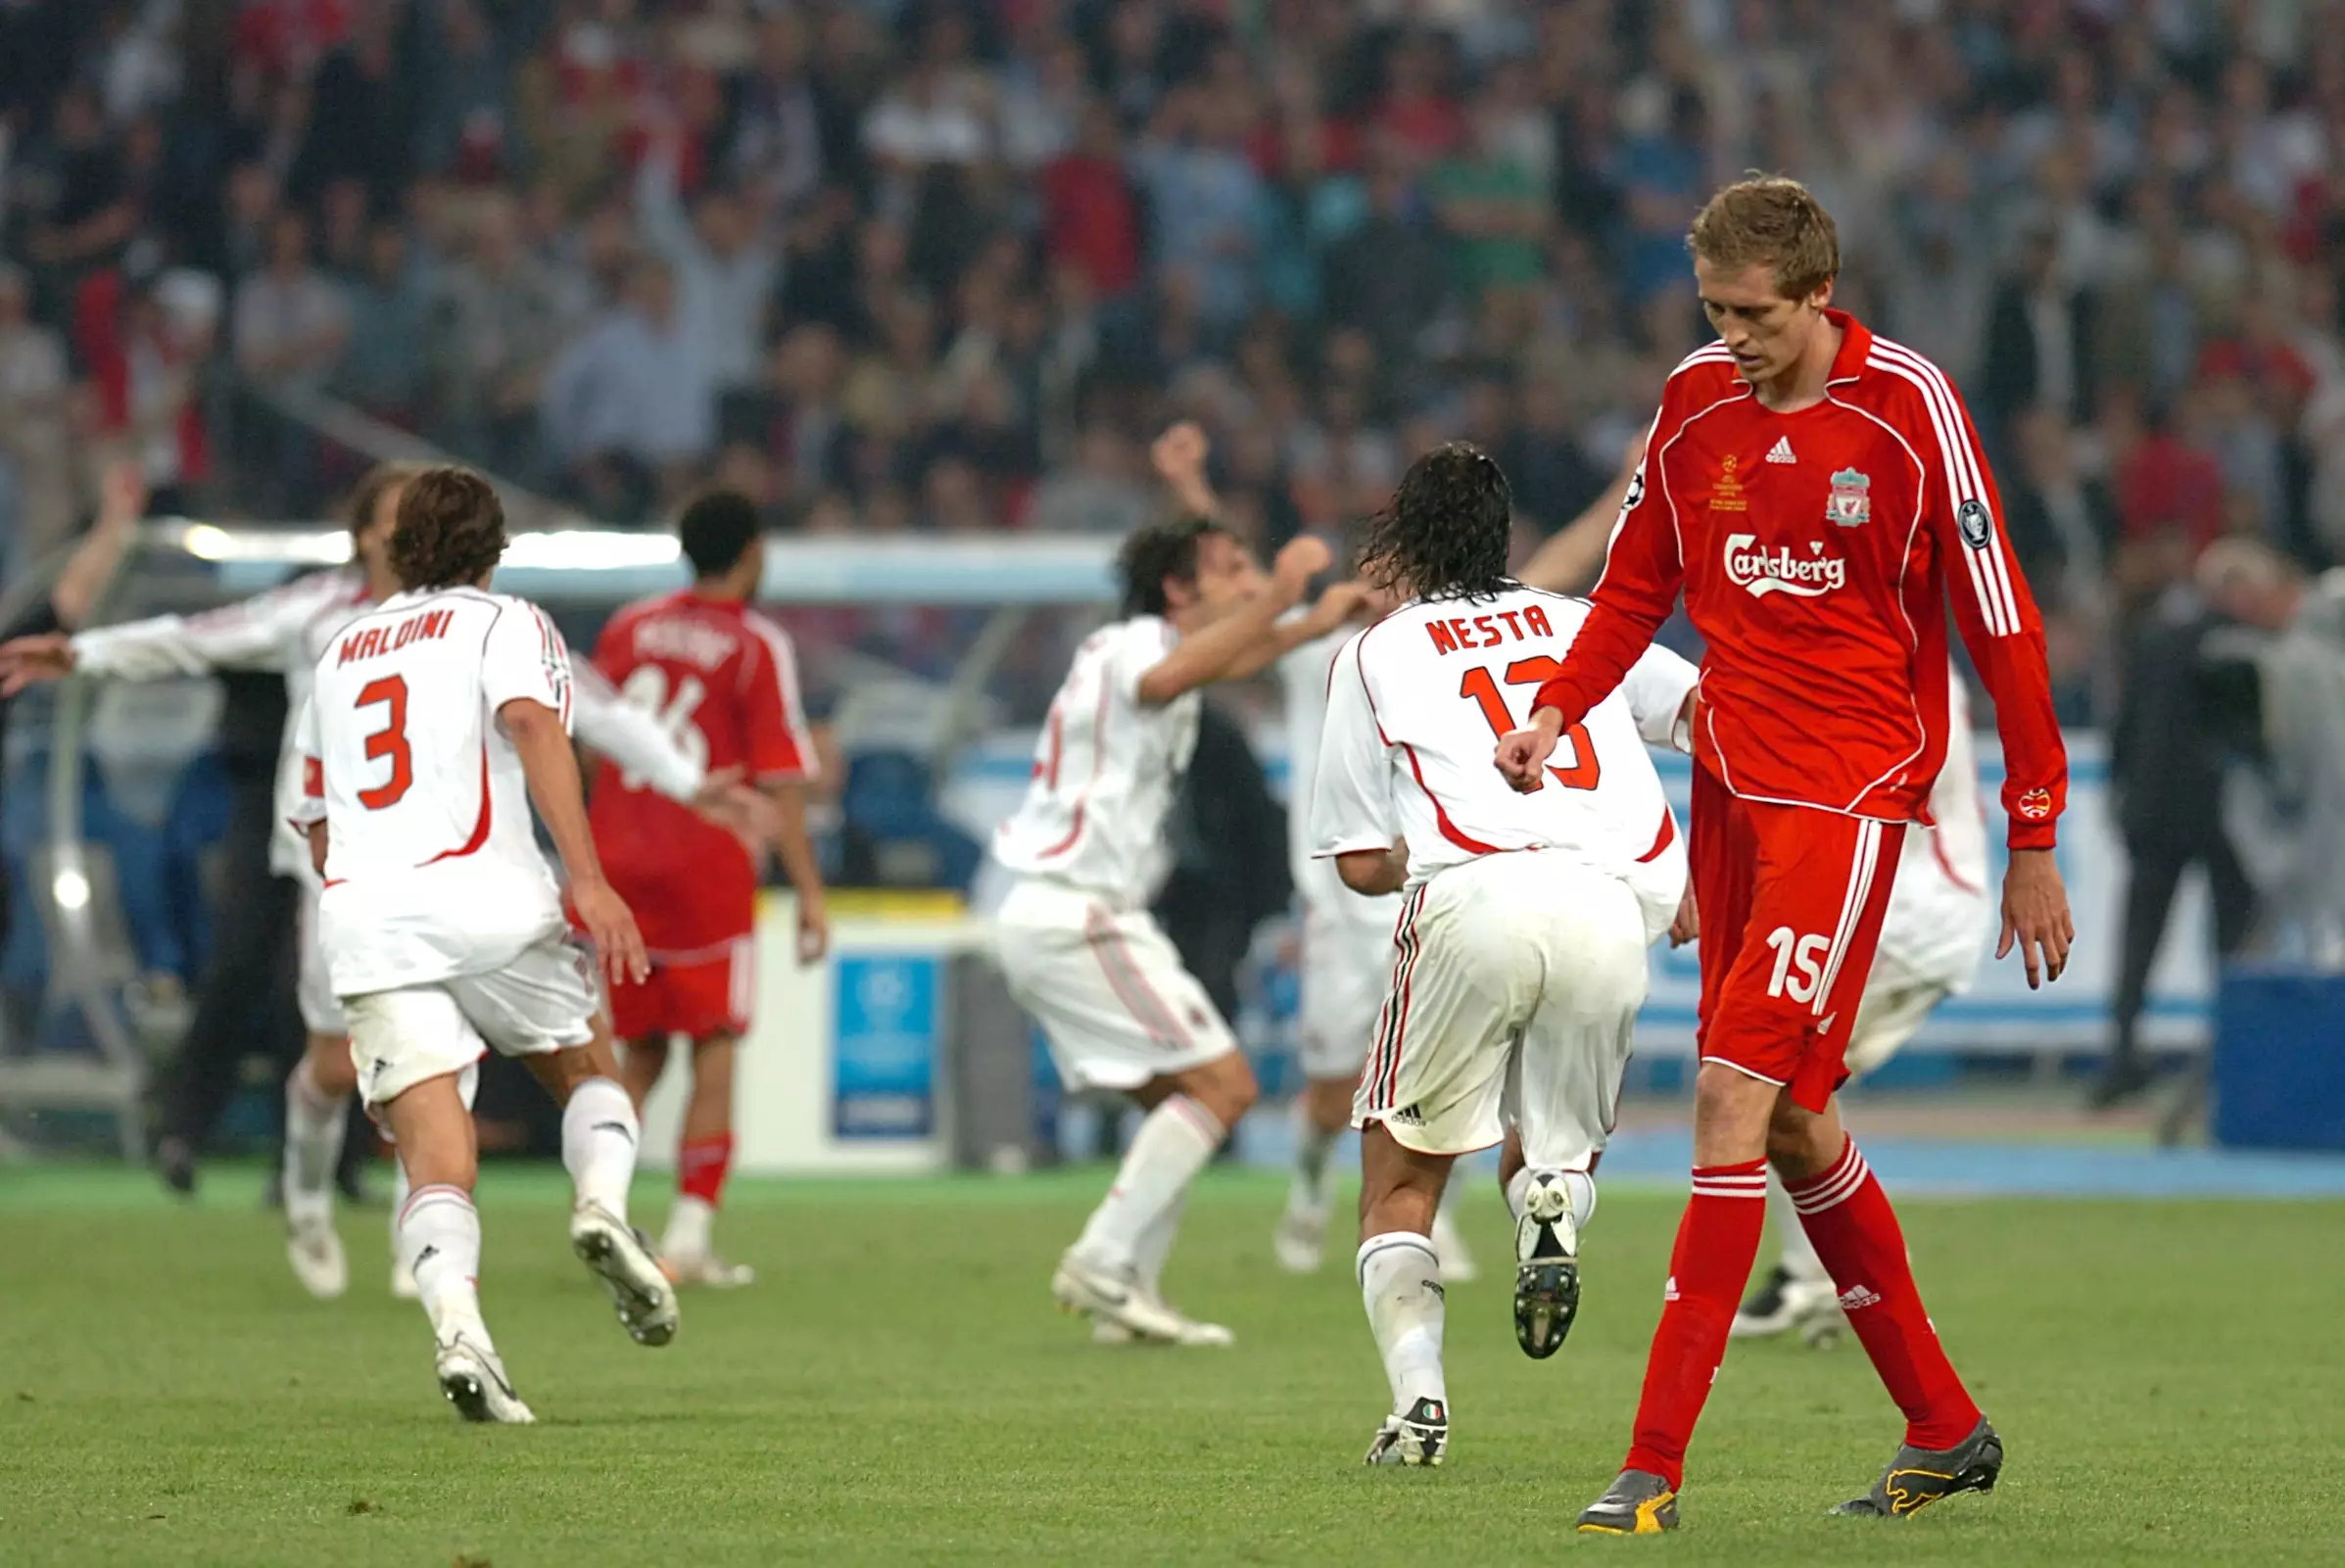 Crouch after Milan had beaten them in the final. Image: PA Images